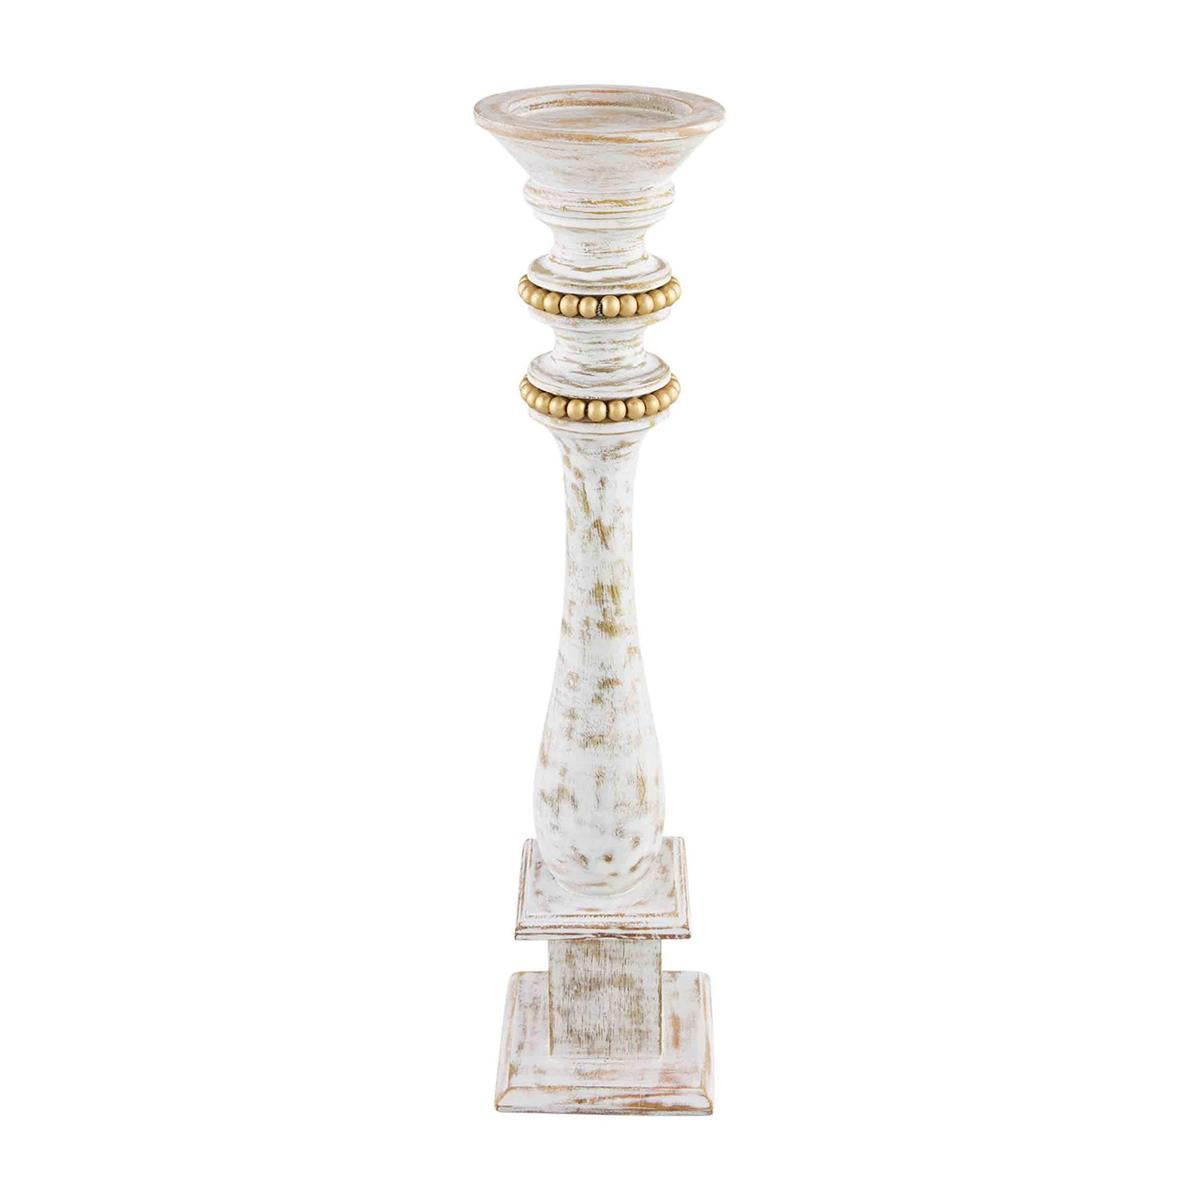 large gold bead candlestick displayed against a white background